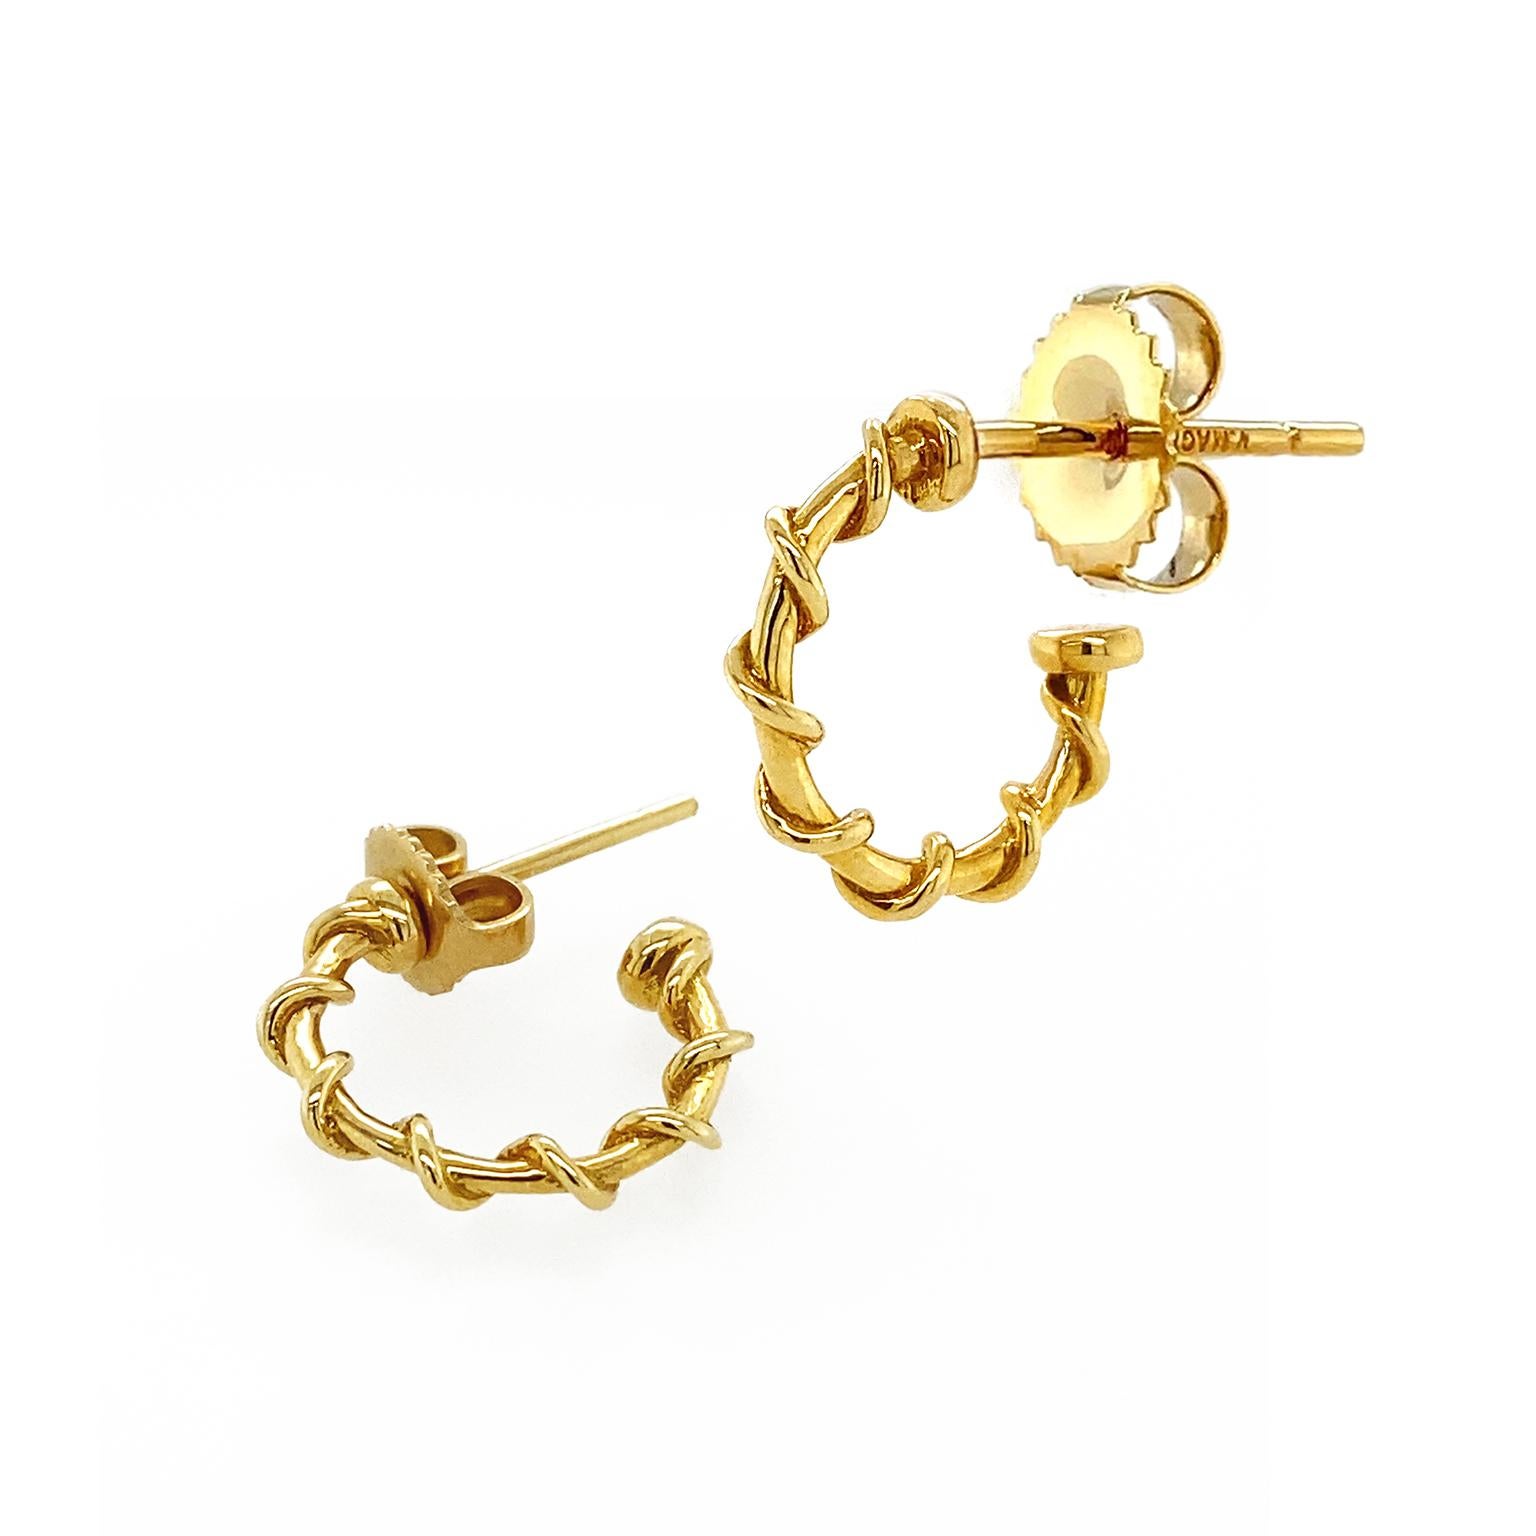 Inspired by a classic nautical theme, these 18k yellow gold hoop earrings exude warm brilliance. A 3/4 formed hoop is the base, while an 18k yellow gold strand coils similar to a nautical rope for texture. The flat base at the end of the hoop